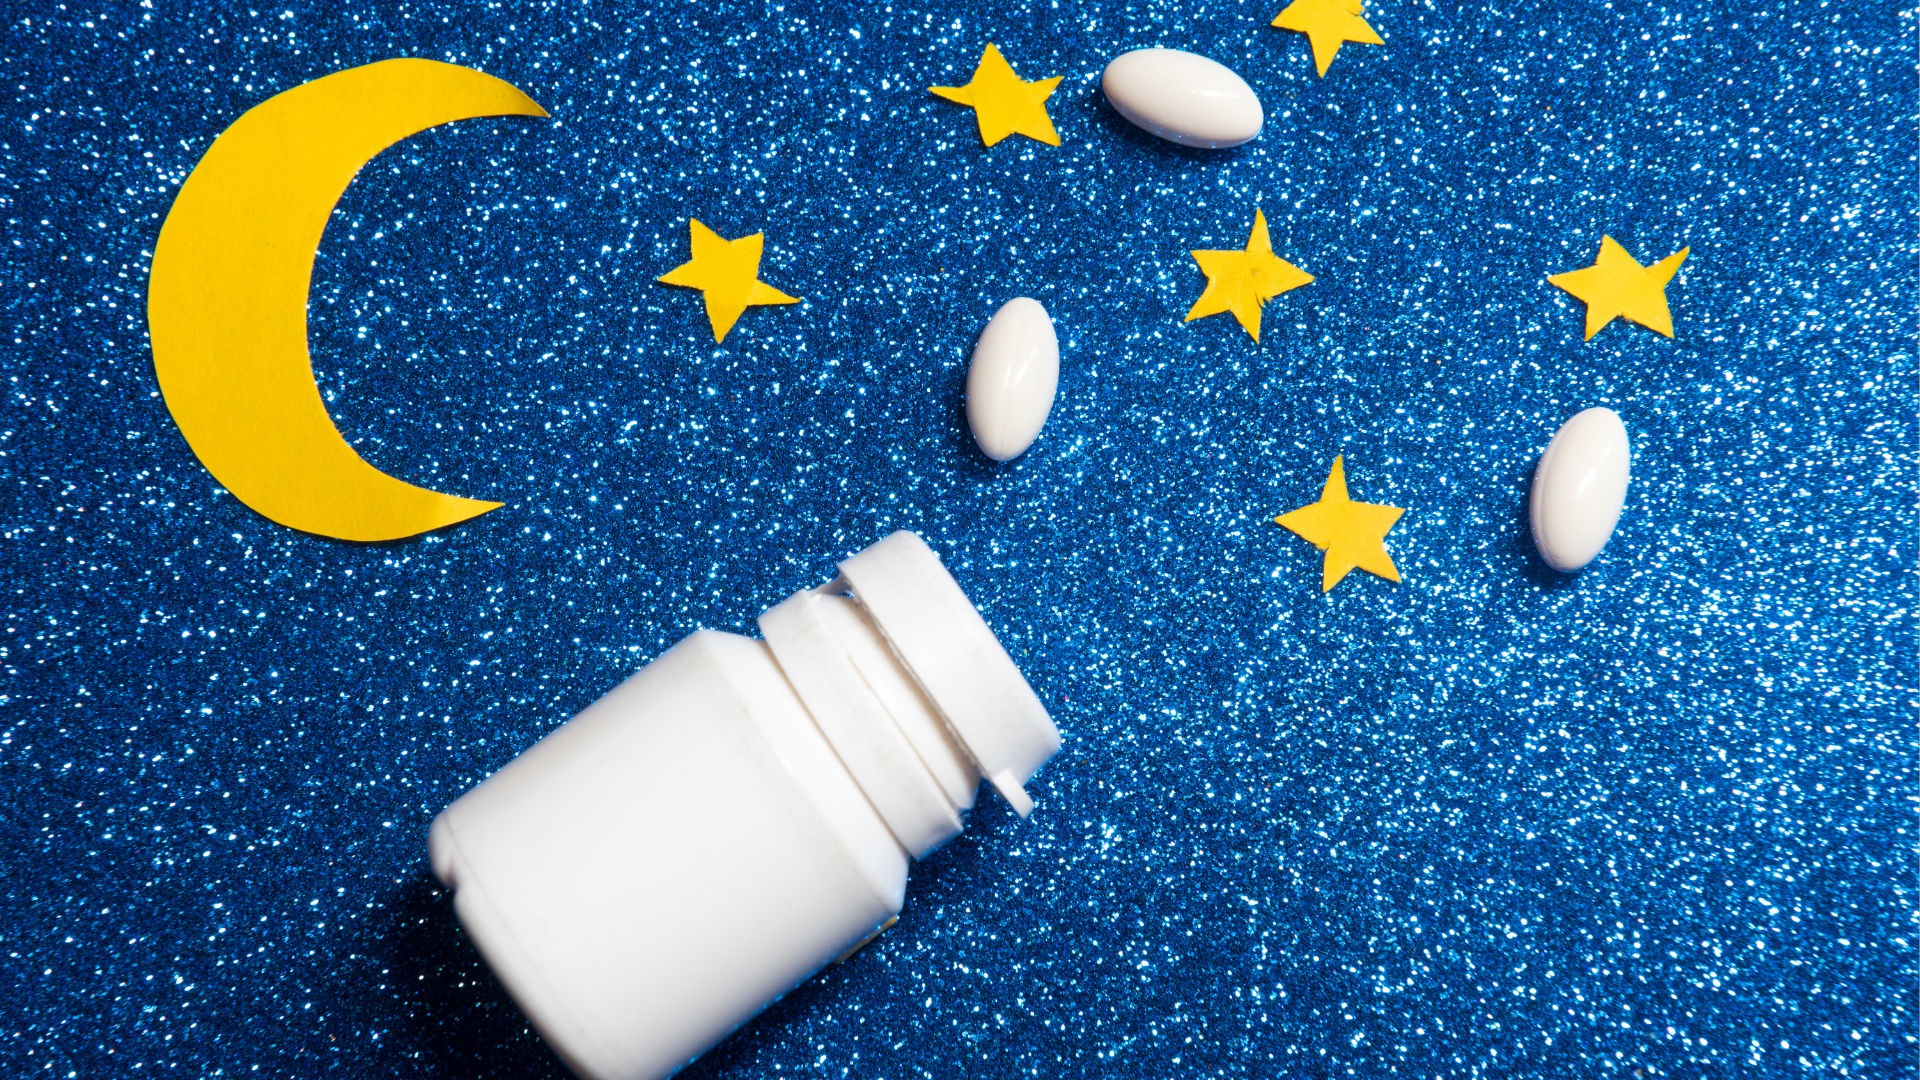 pill holder on side with pills against the background of night sky